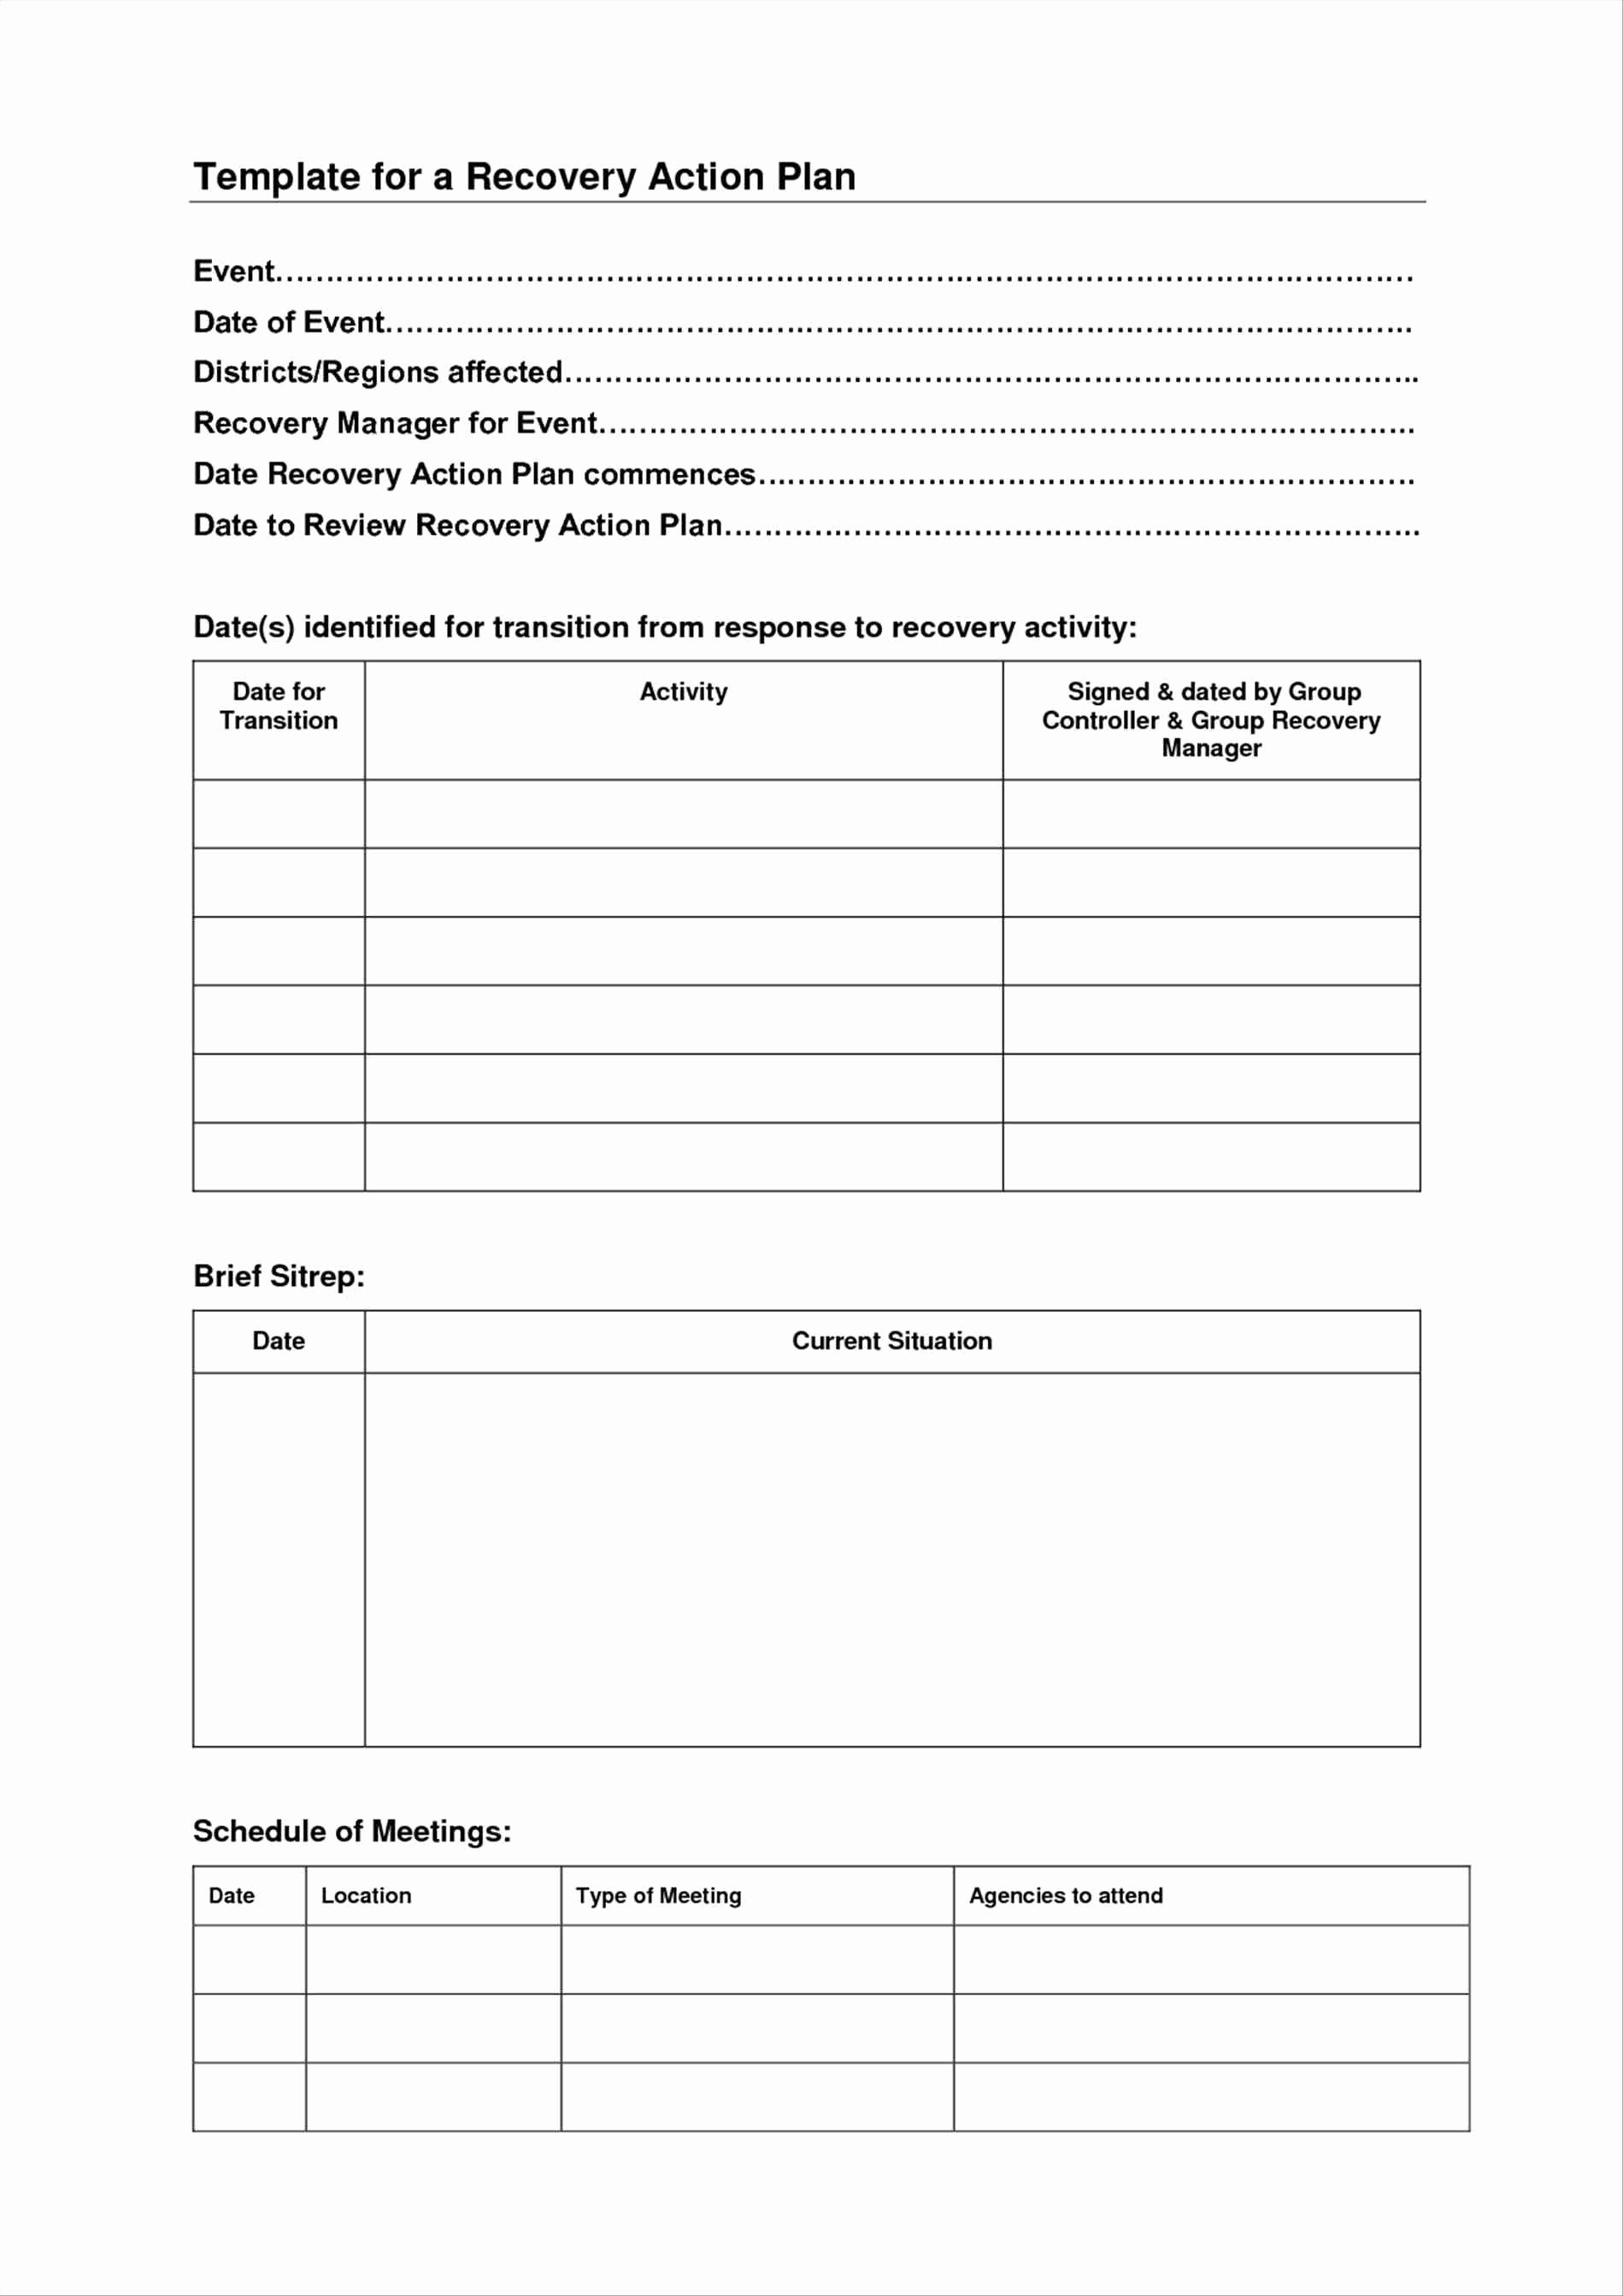 fillable-wellness-recovery-action-plan-forms-printable-forms-free-online